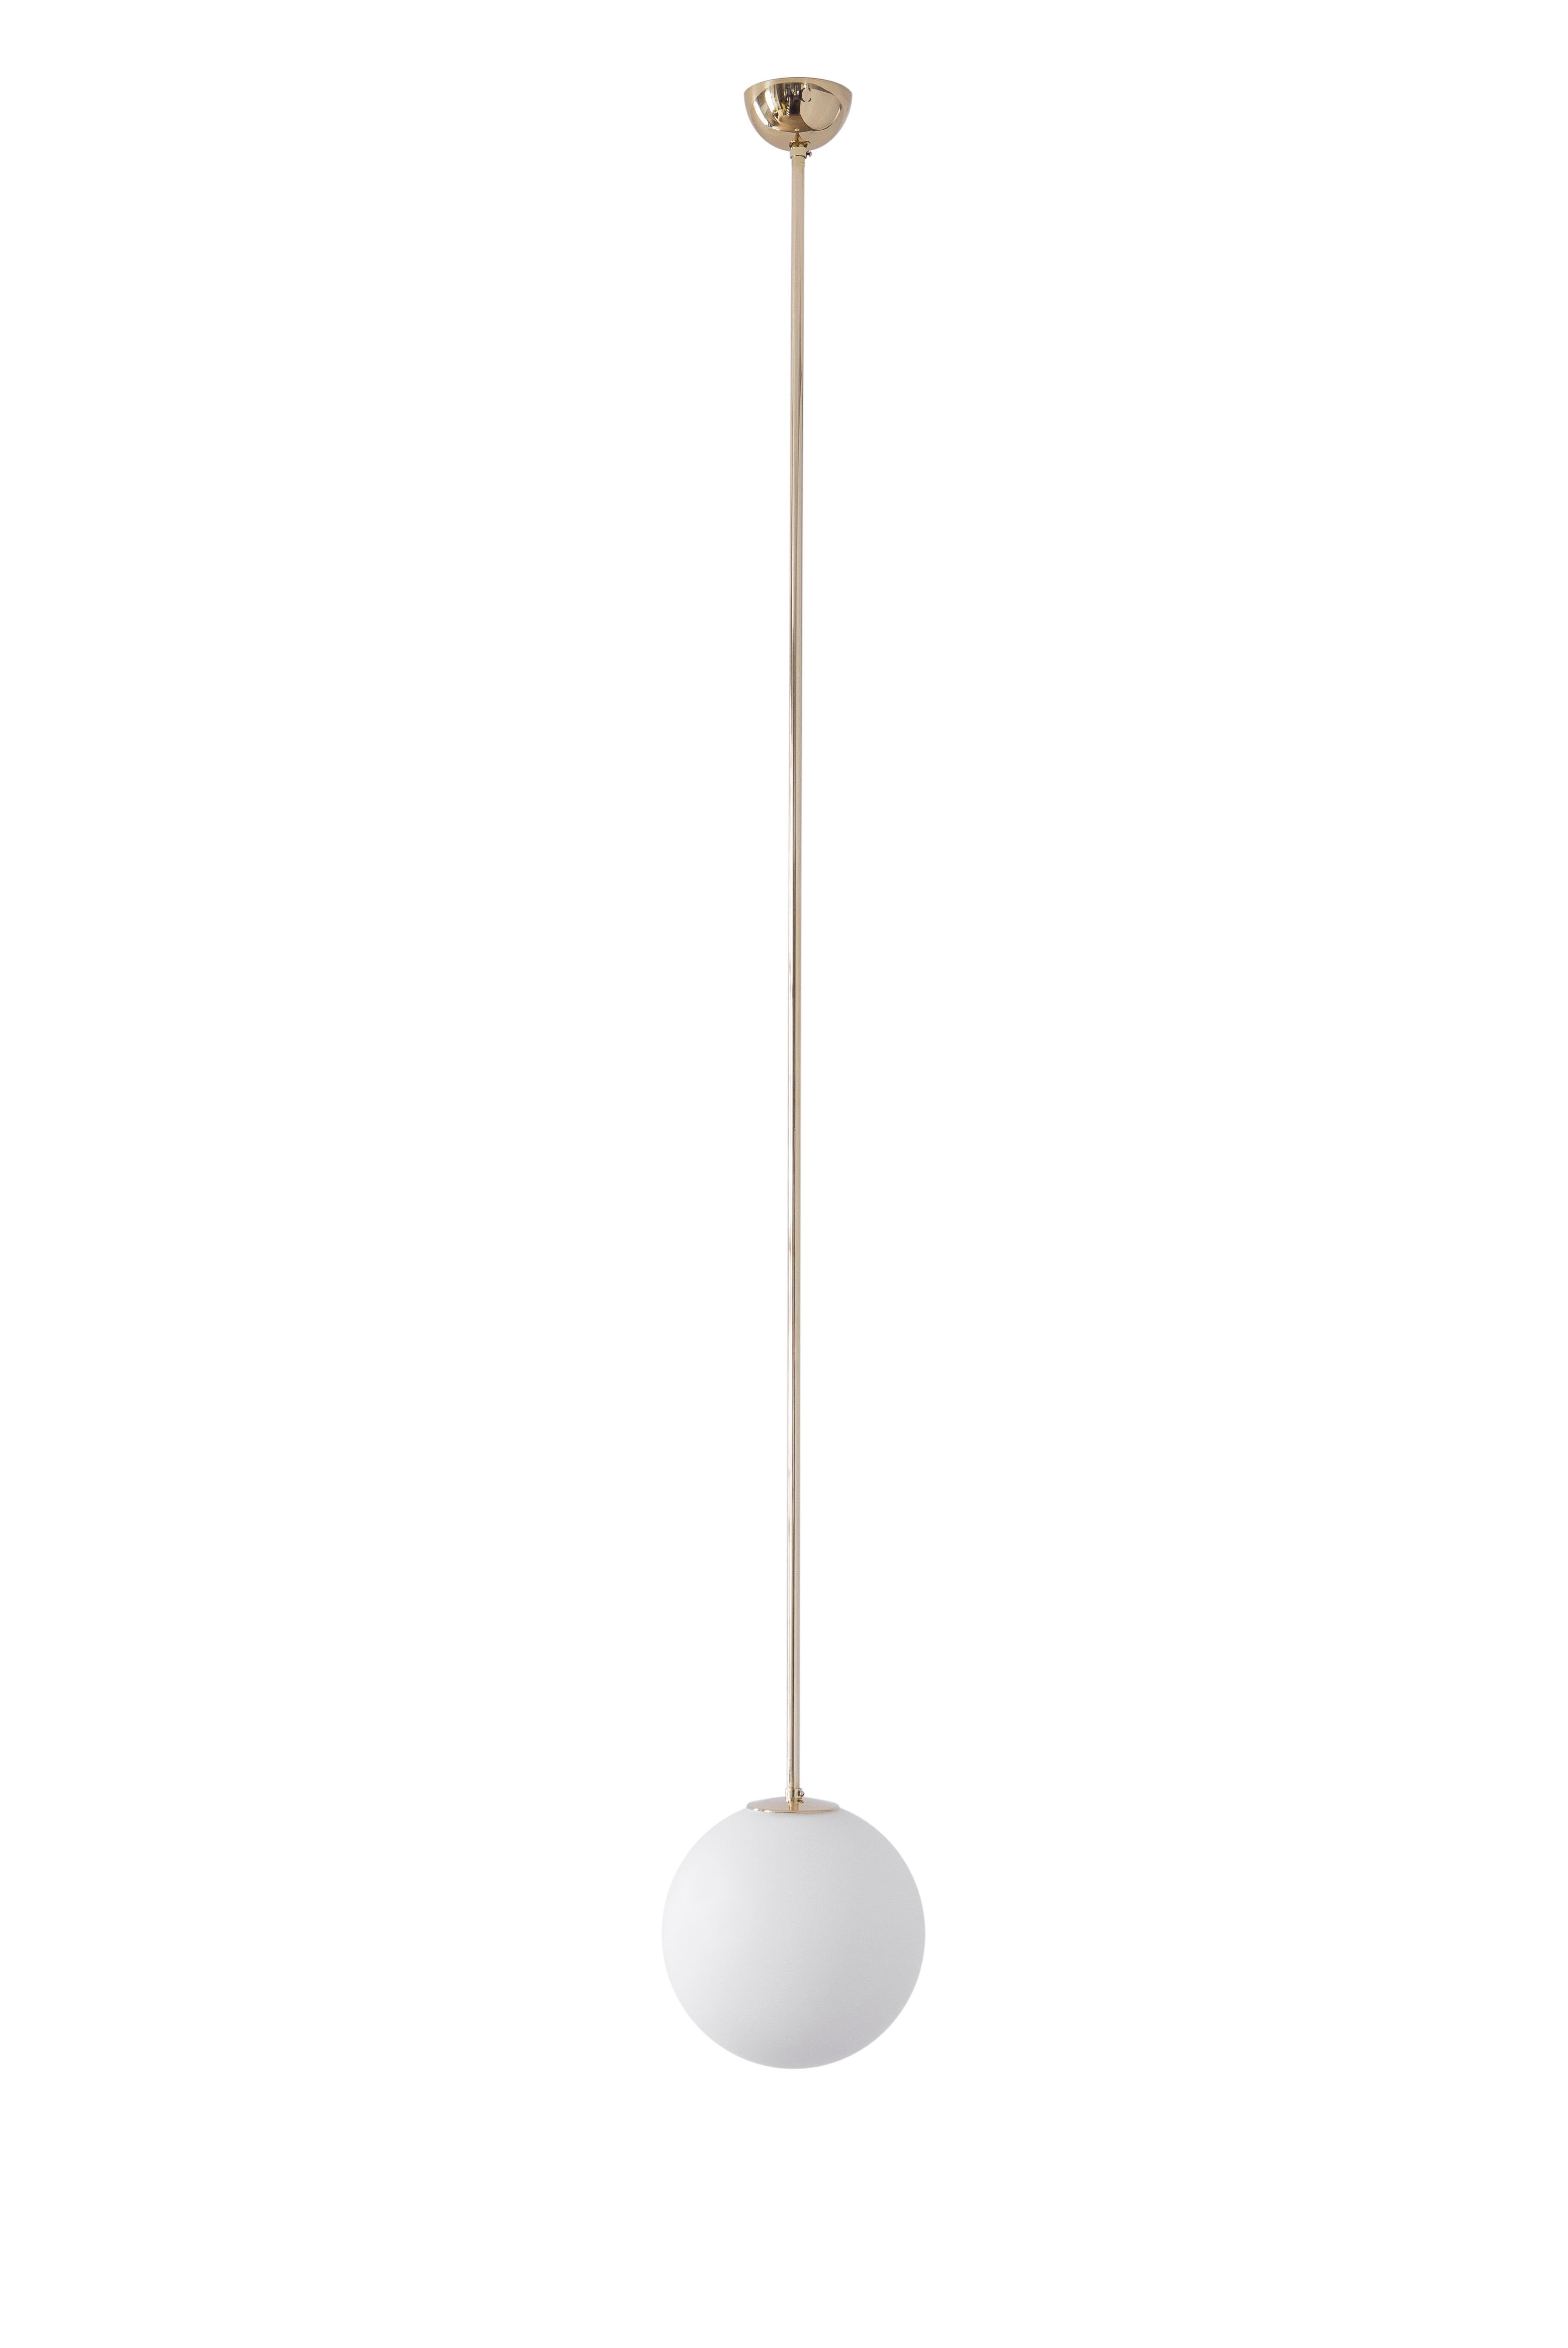 Pendant 06 by Magic Circus Editions
Dimensions: D 25 x W 25 x H 175 cm, also available in H 90, 110, 130, 150, 190 cm
Materials: Brass, mouth blown glass

All our lamps can be wired according to each country. If sold to the USA it will be wired